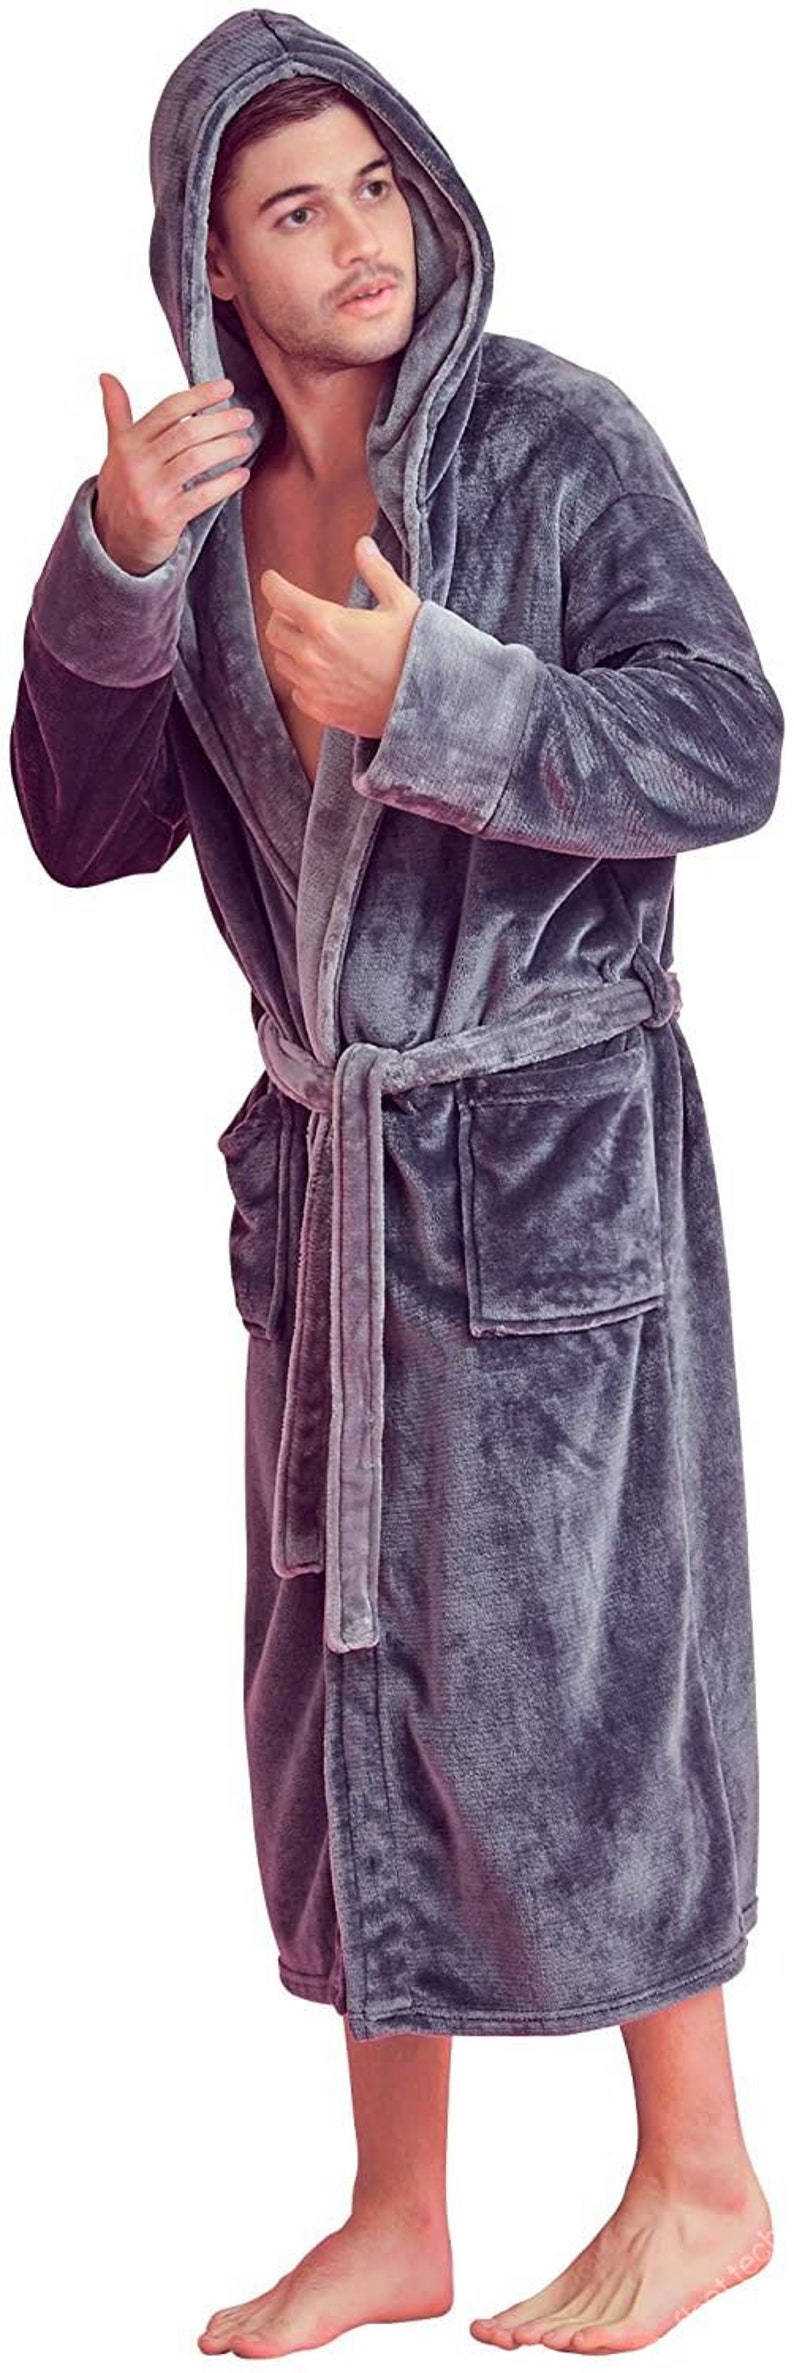 MEN'S Luxurious HOODED BATHROBE New Custom Luxury with Embroidery or Blank 6140 Lounge Wear for Adult Men Bridal Gift image 6